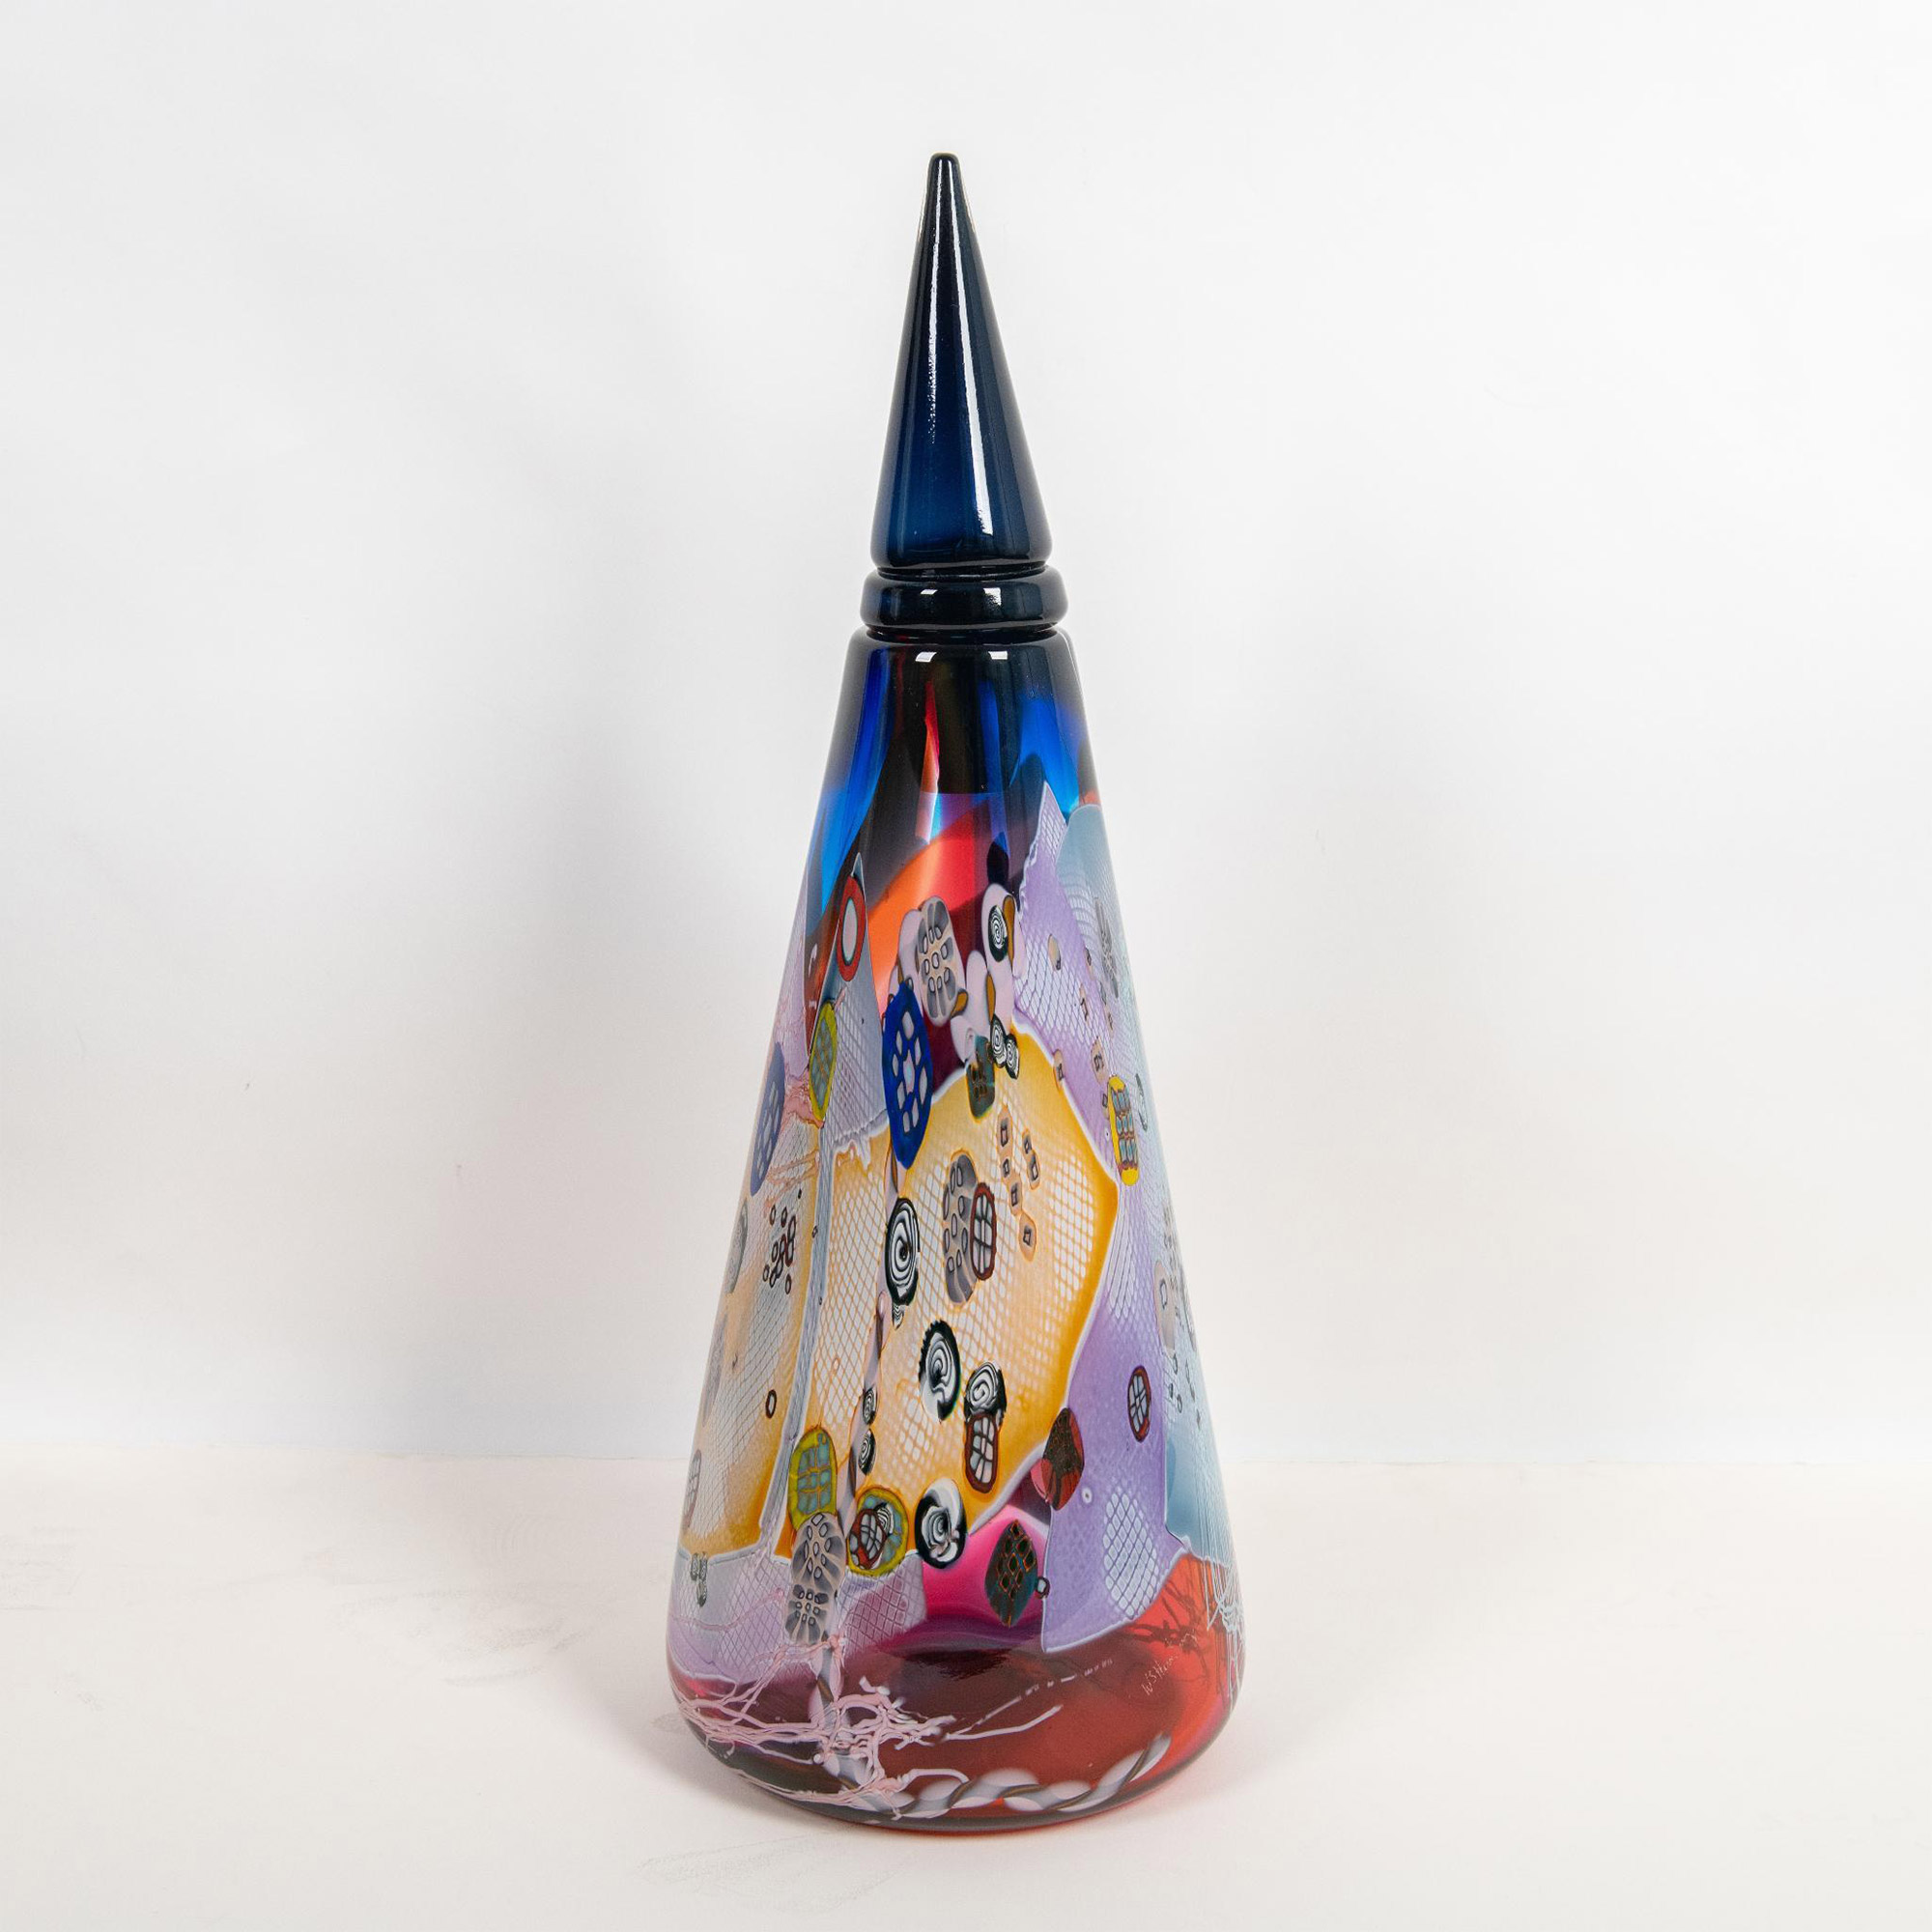 Wes Hunting, Original Hand Blown Color Glass Vessel, Signed - Image 3 of 6